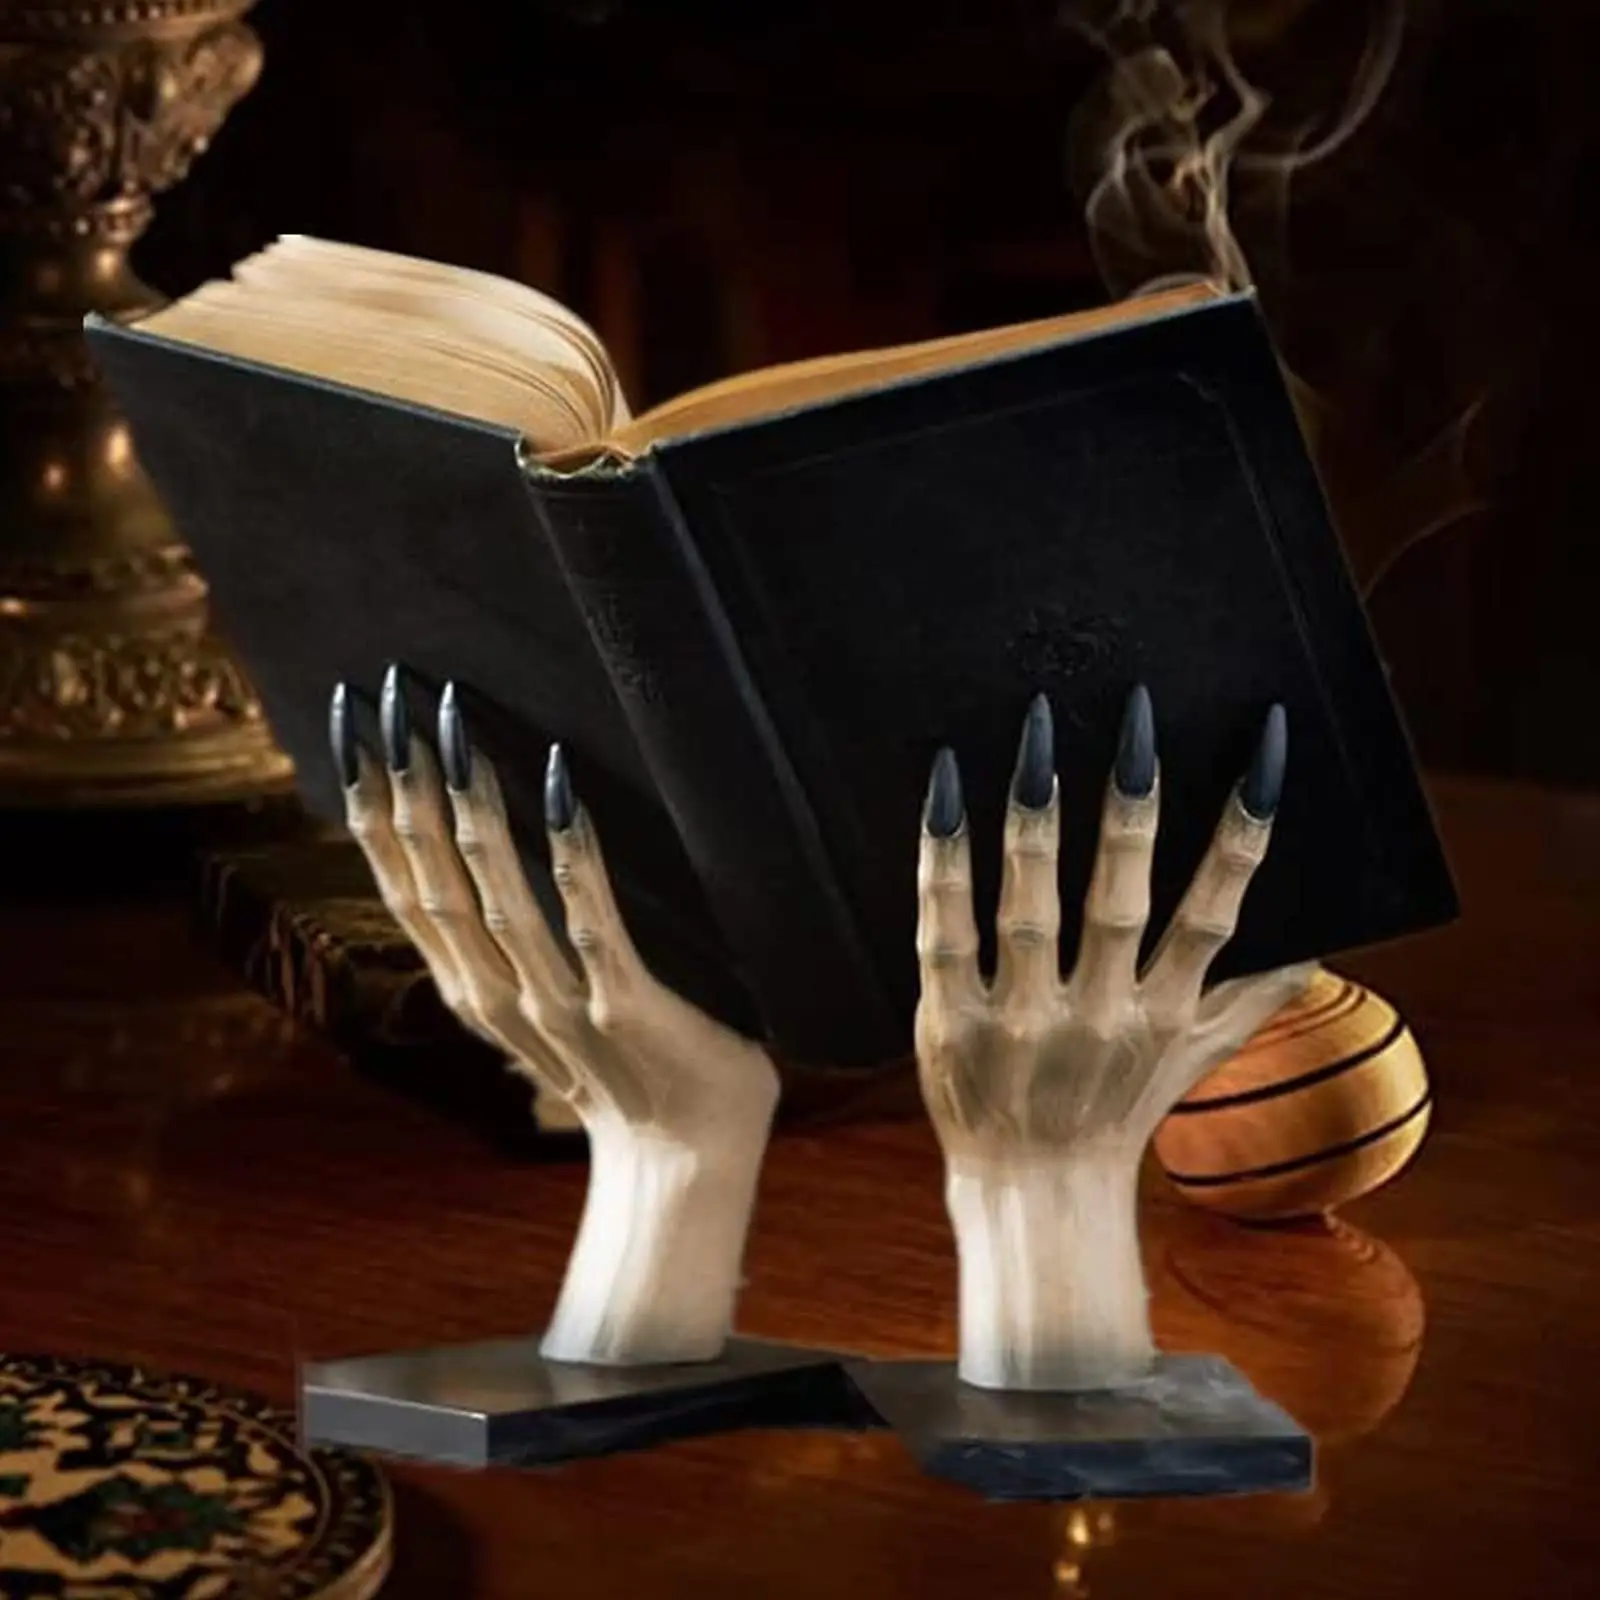 Halloween Bookends Decor Gothic Home Decor Bookends Shelves Unique Scary Monster Hand Book Ends Spooky Halloween Room Decor book ends bicycle vintage universal metal bookends for shelves heavy duty metal non skid bookend supports book shelf holder